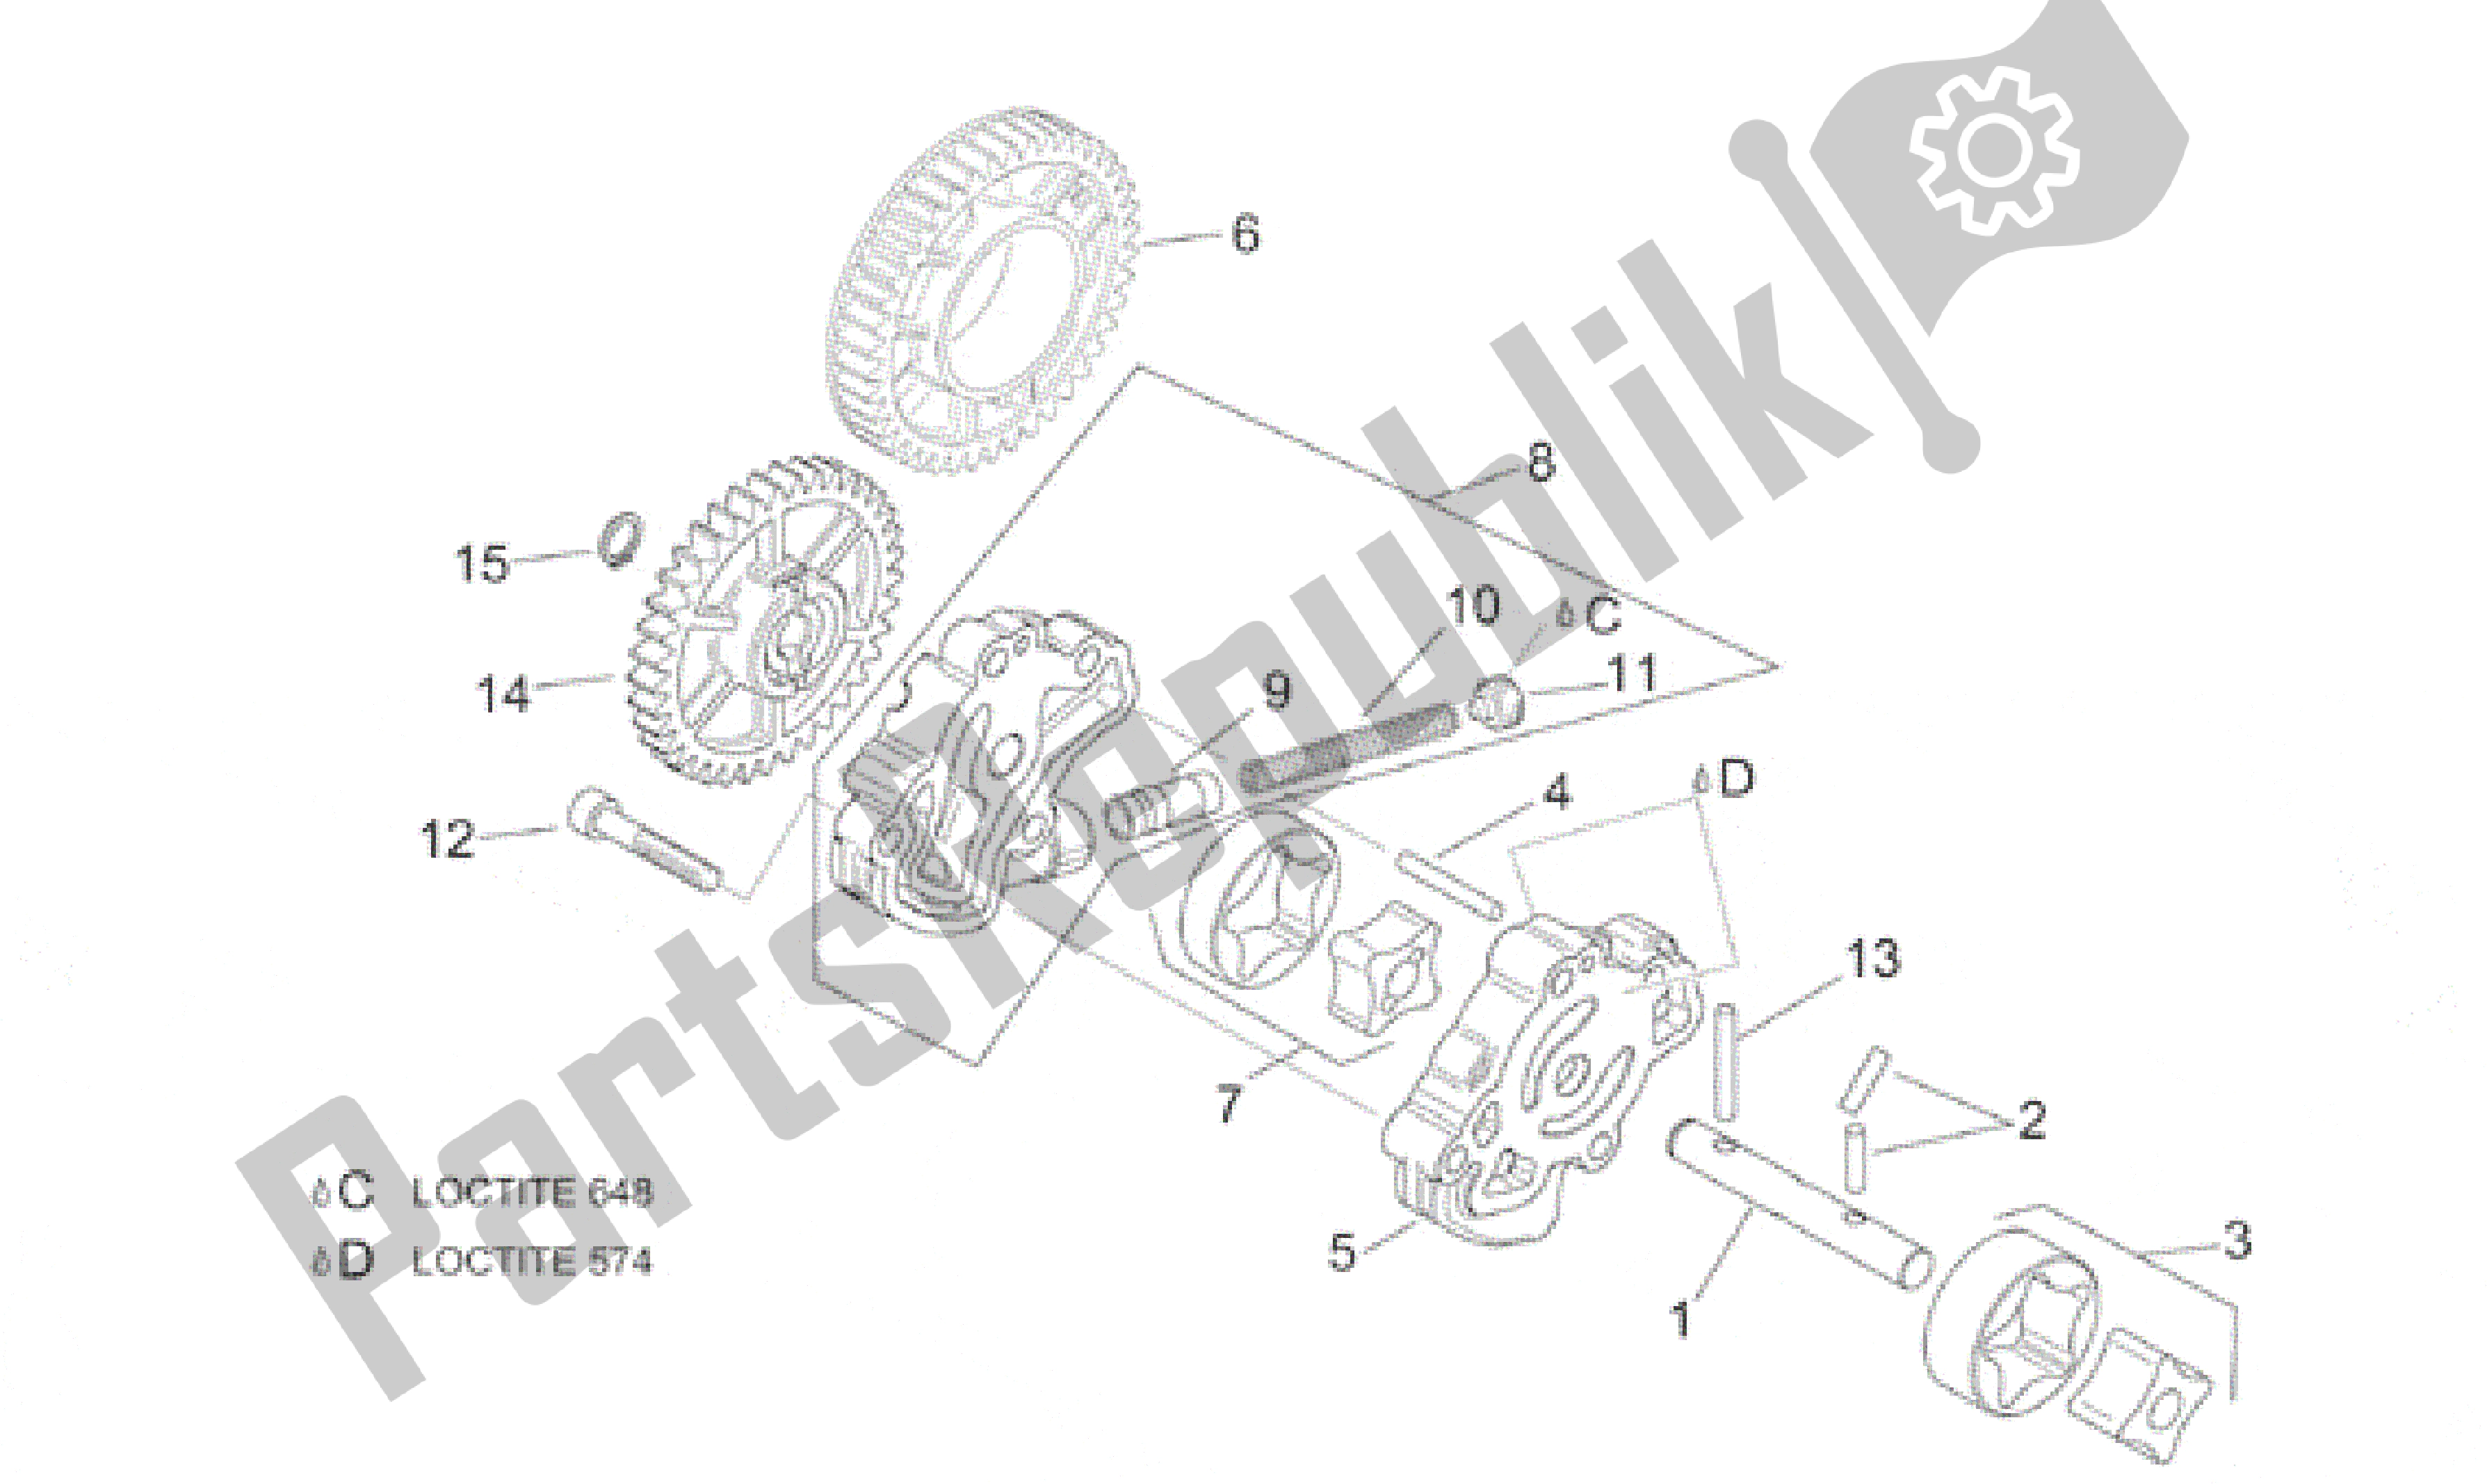 All parts for the Oil Pump of the Aprilia RSV Mille 3901 1000 2001 - 2002